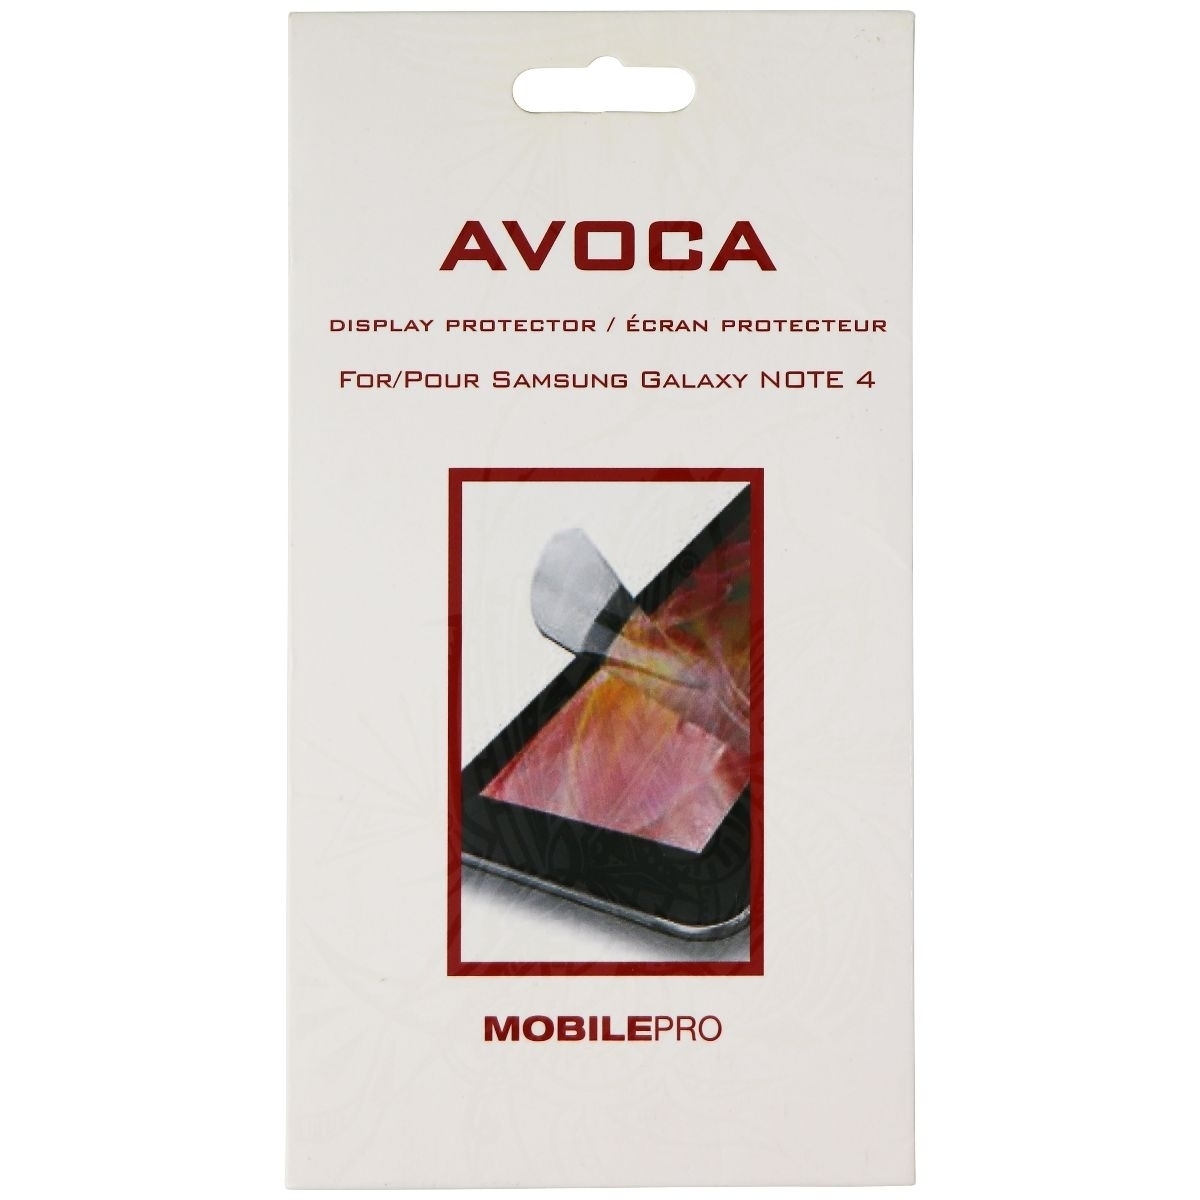 Avoca MobilePro Display Protector 2 Pack For Samsung Galaxy Note4 - Clear